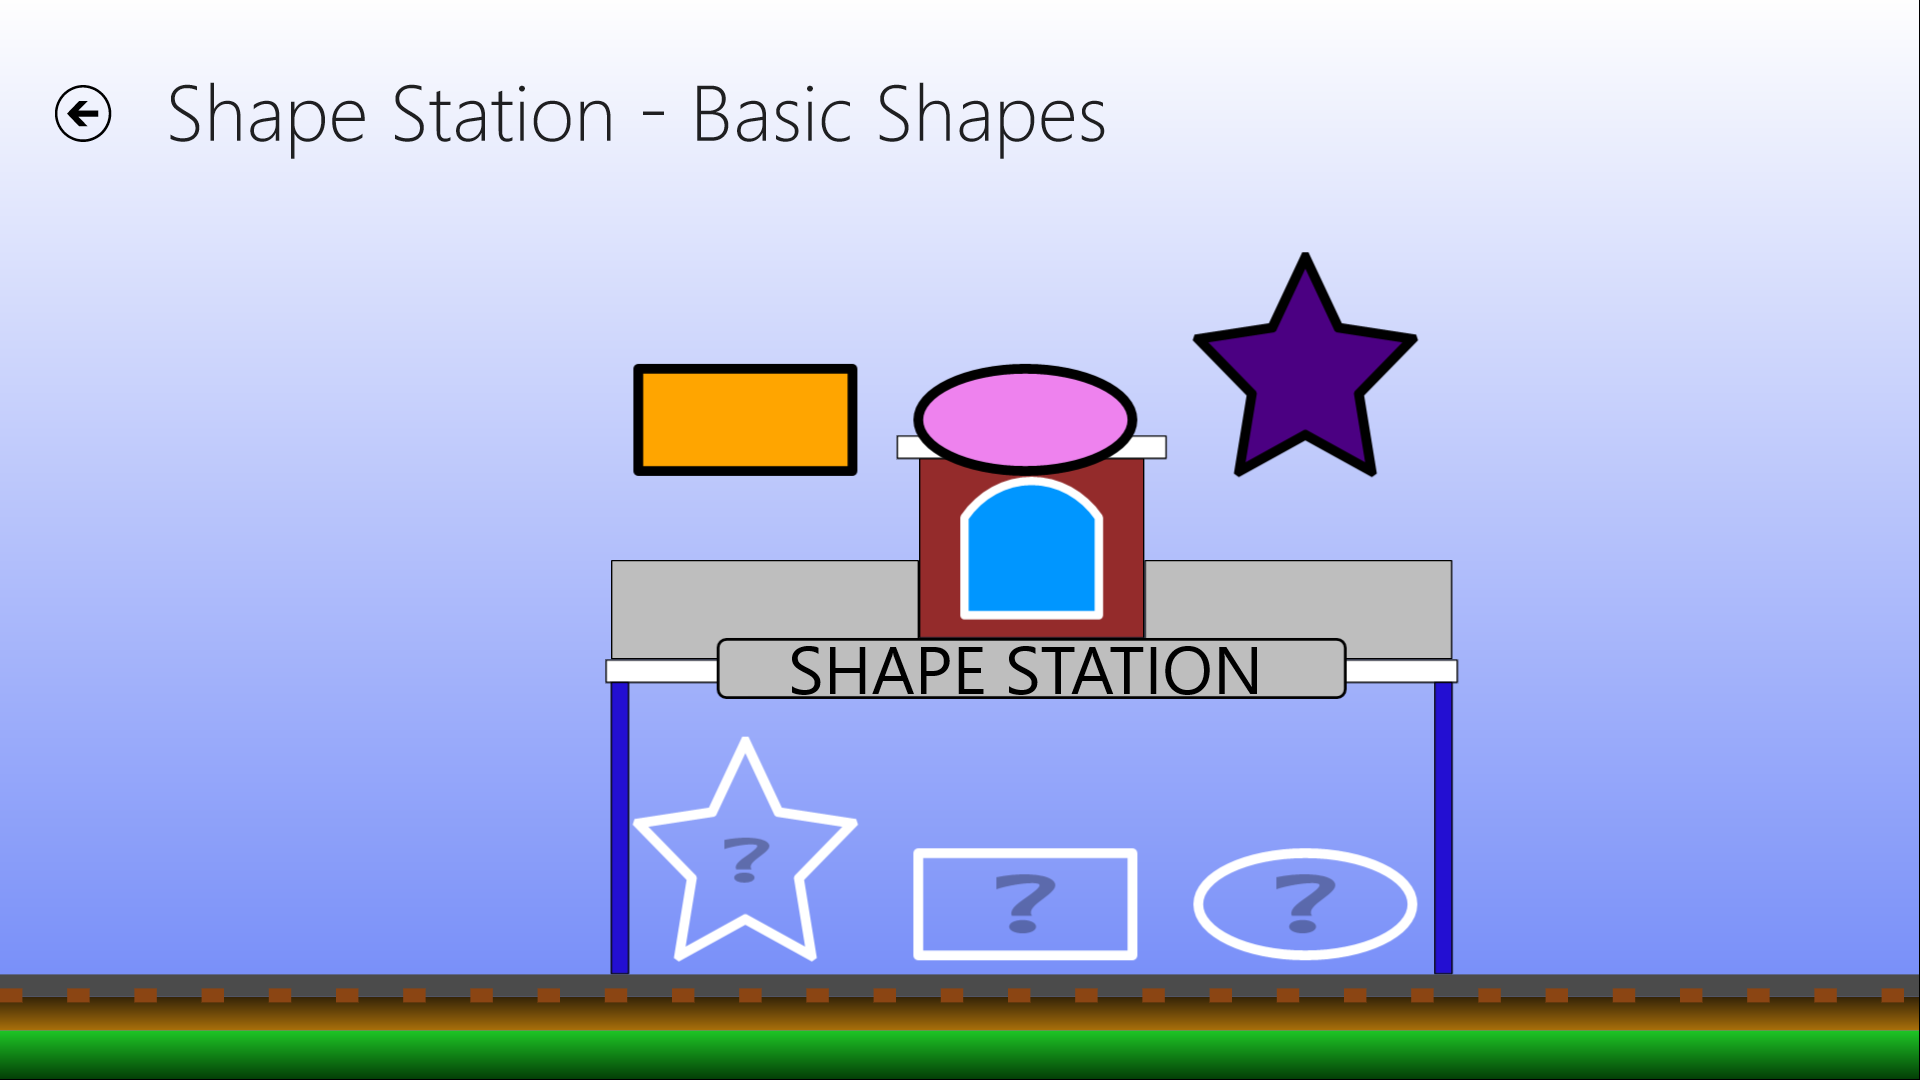 Shape matching at the station